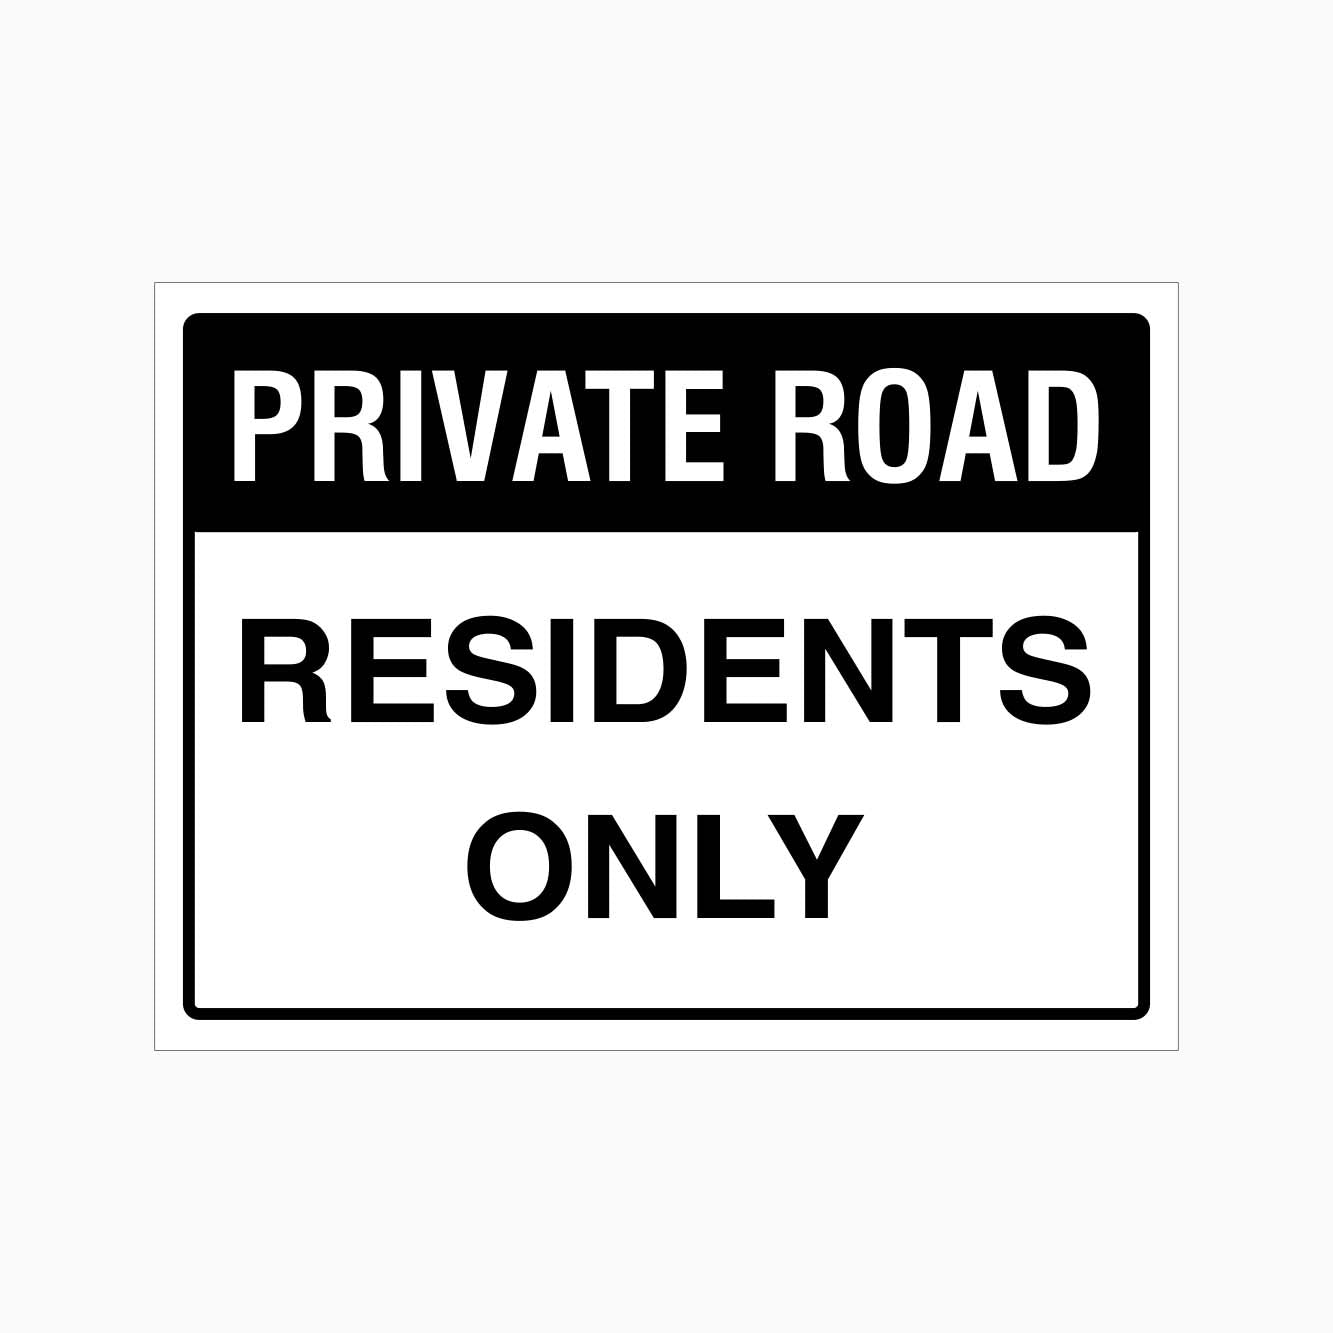 PRIVATE ROAD RESIDENTS ONLY SIGN - GET SIGNS